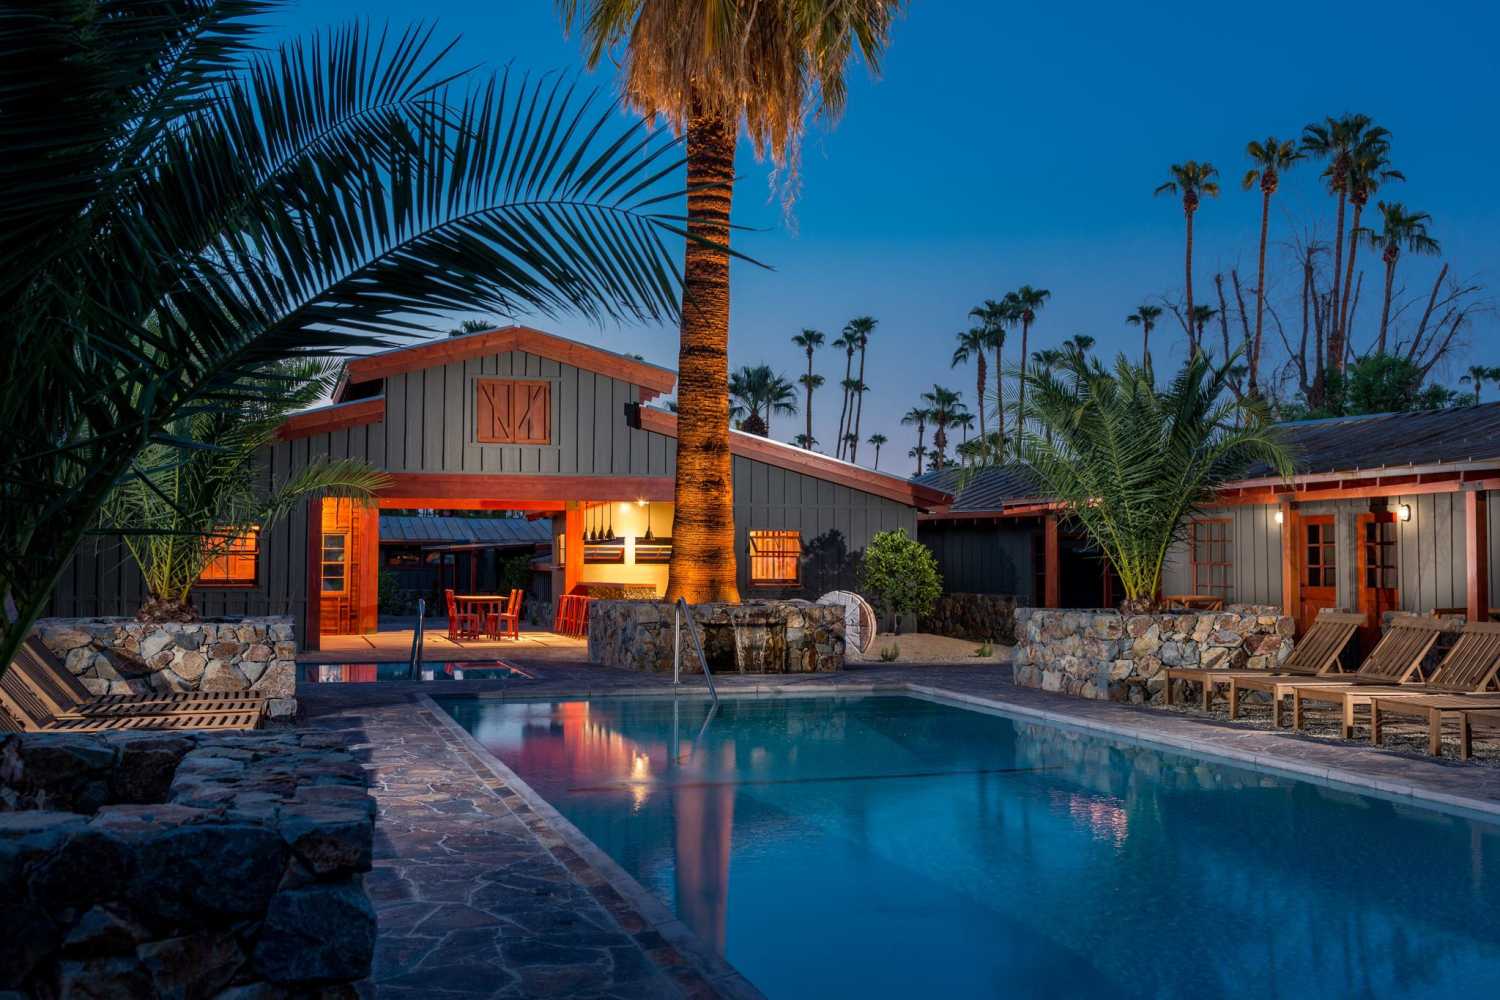 Sparrows Lodge Palm Springs, California - United States Of America